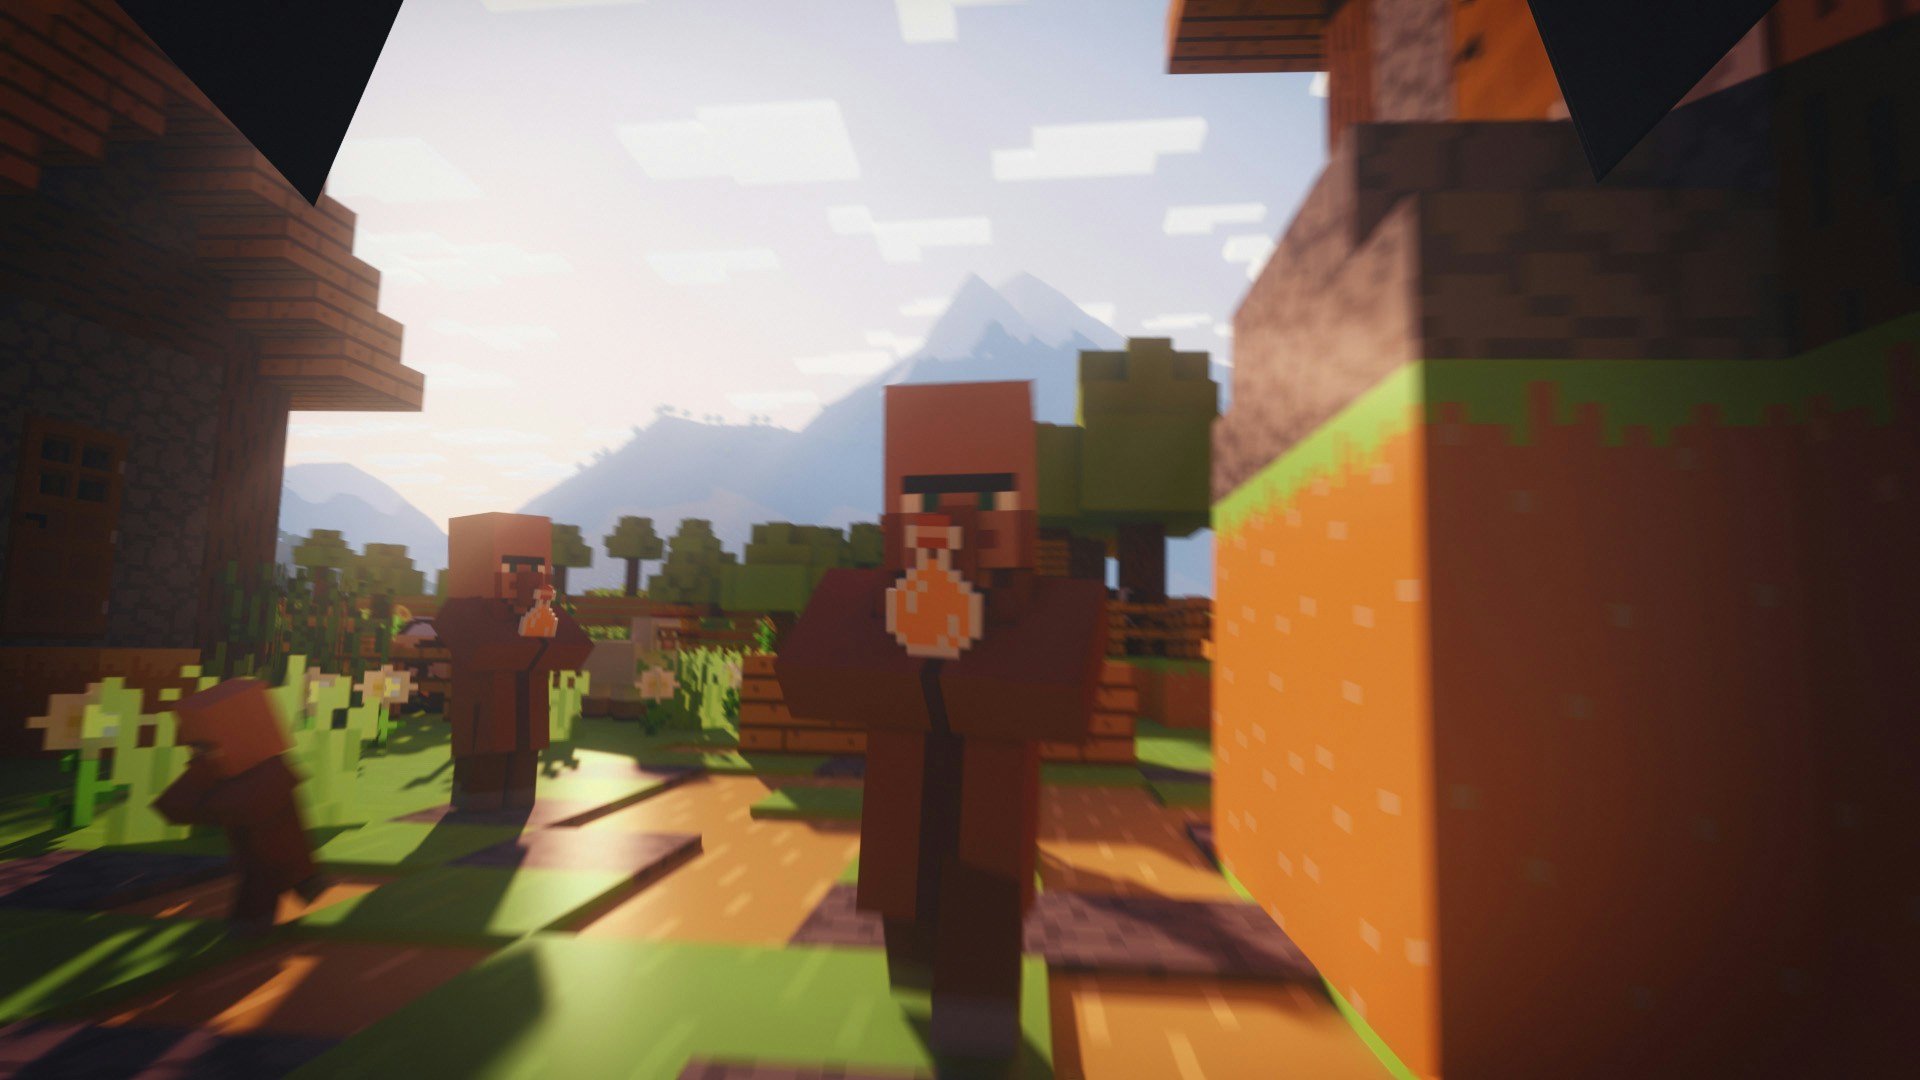 Villagers with honey in a sunny minecraft village